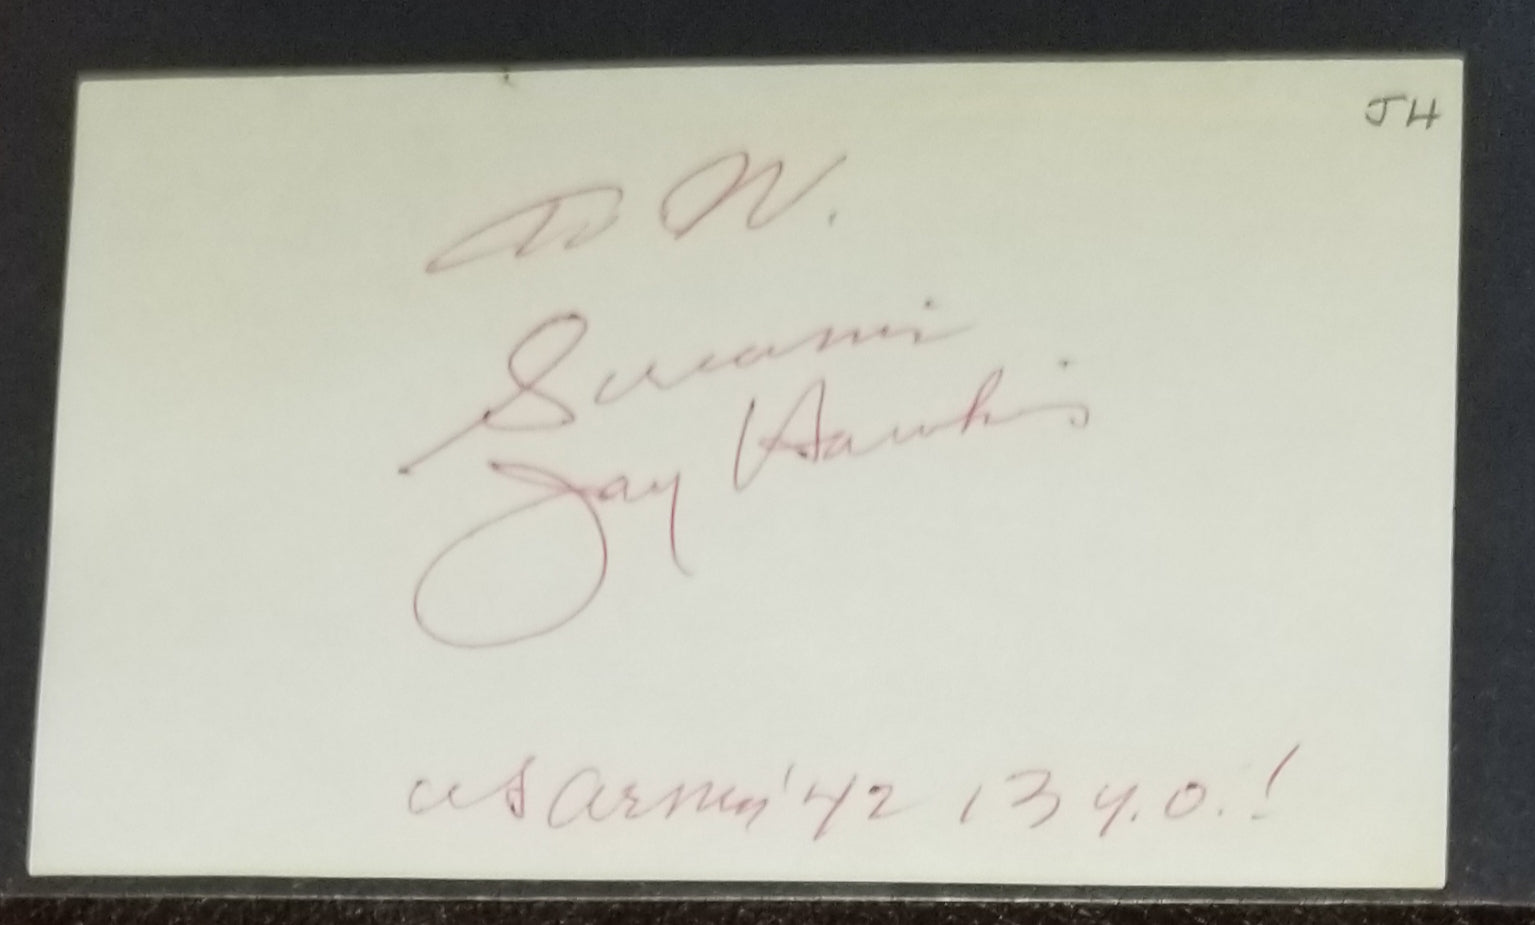 "I PUT A SPELL ON YOU" SINGER SCREAMIN' JAY HAWKINS HAND SIGNED CARD D.2000